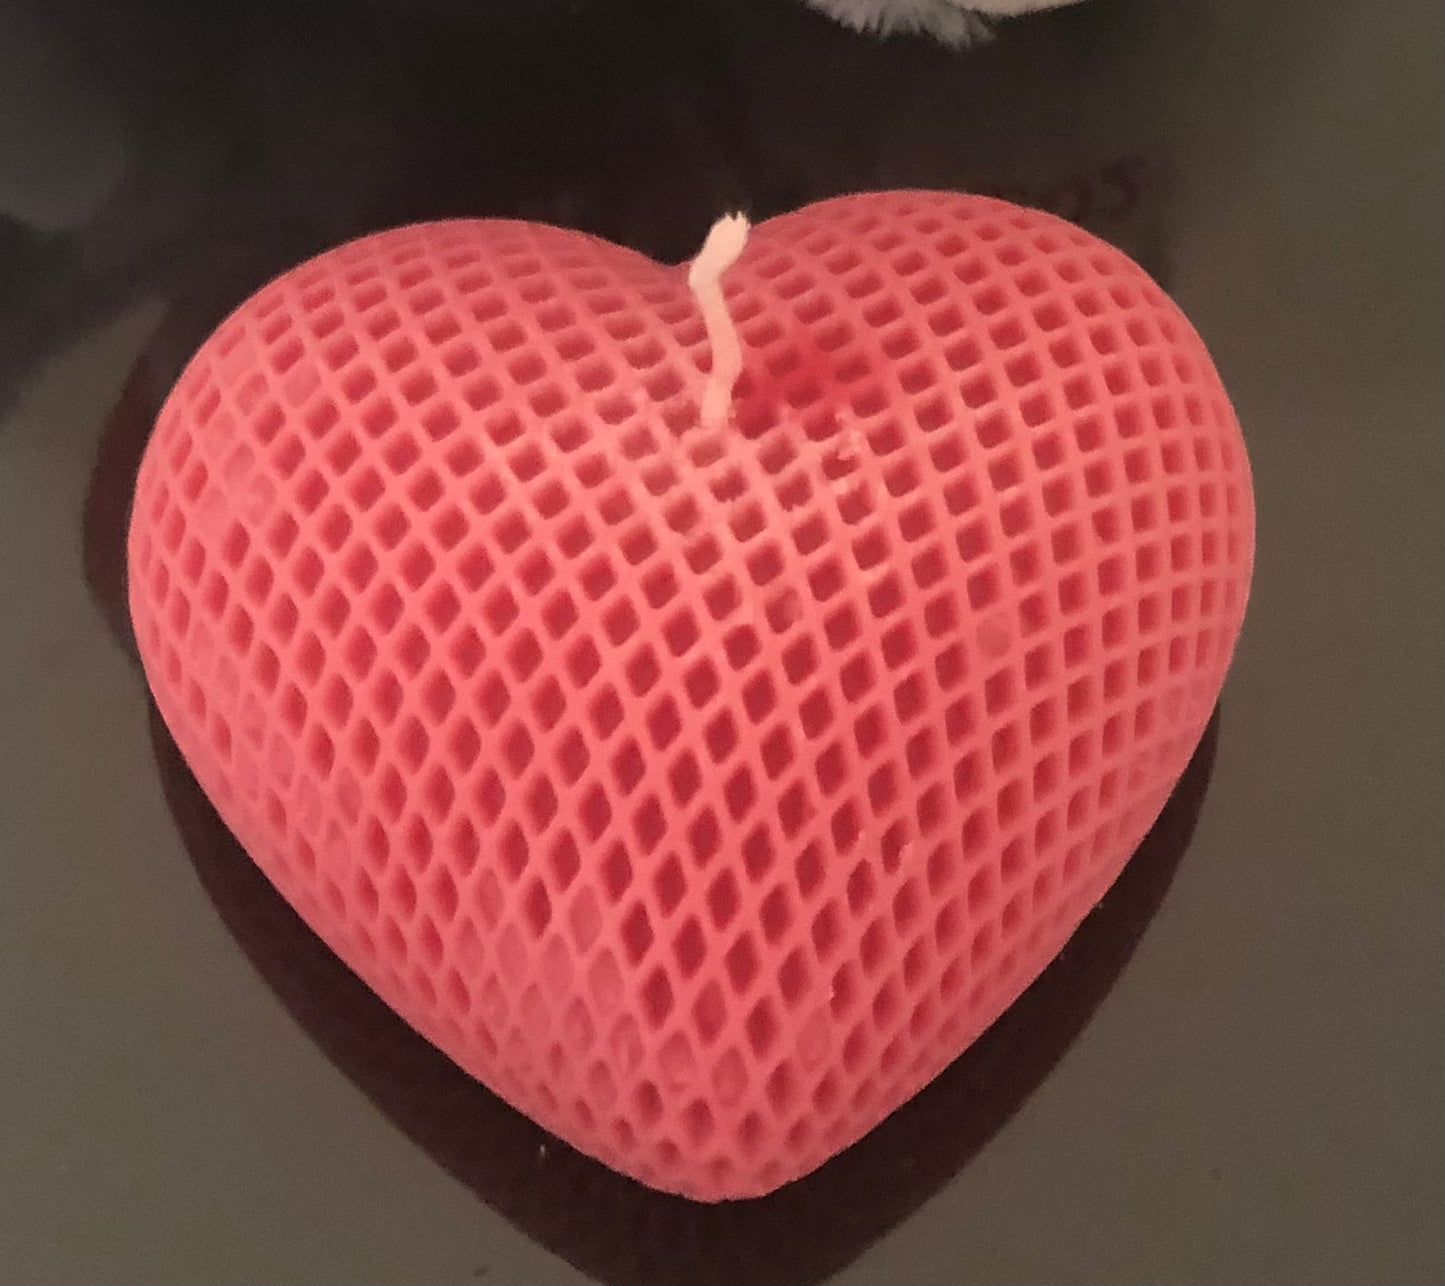 Cherry Blossom Heart Candle